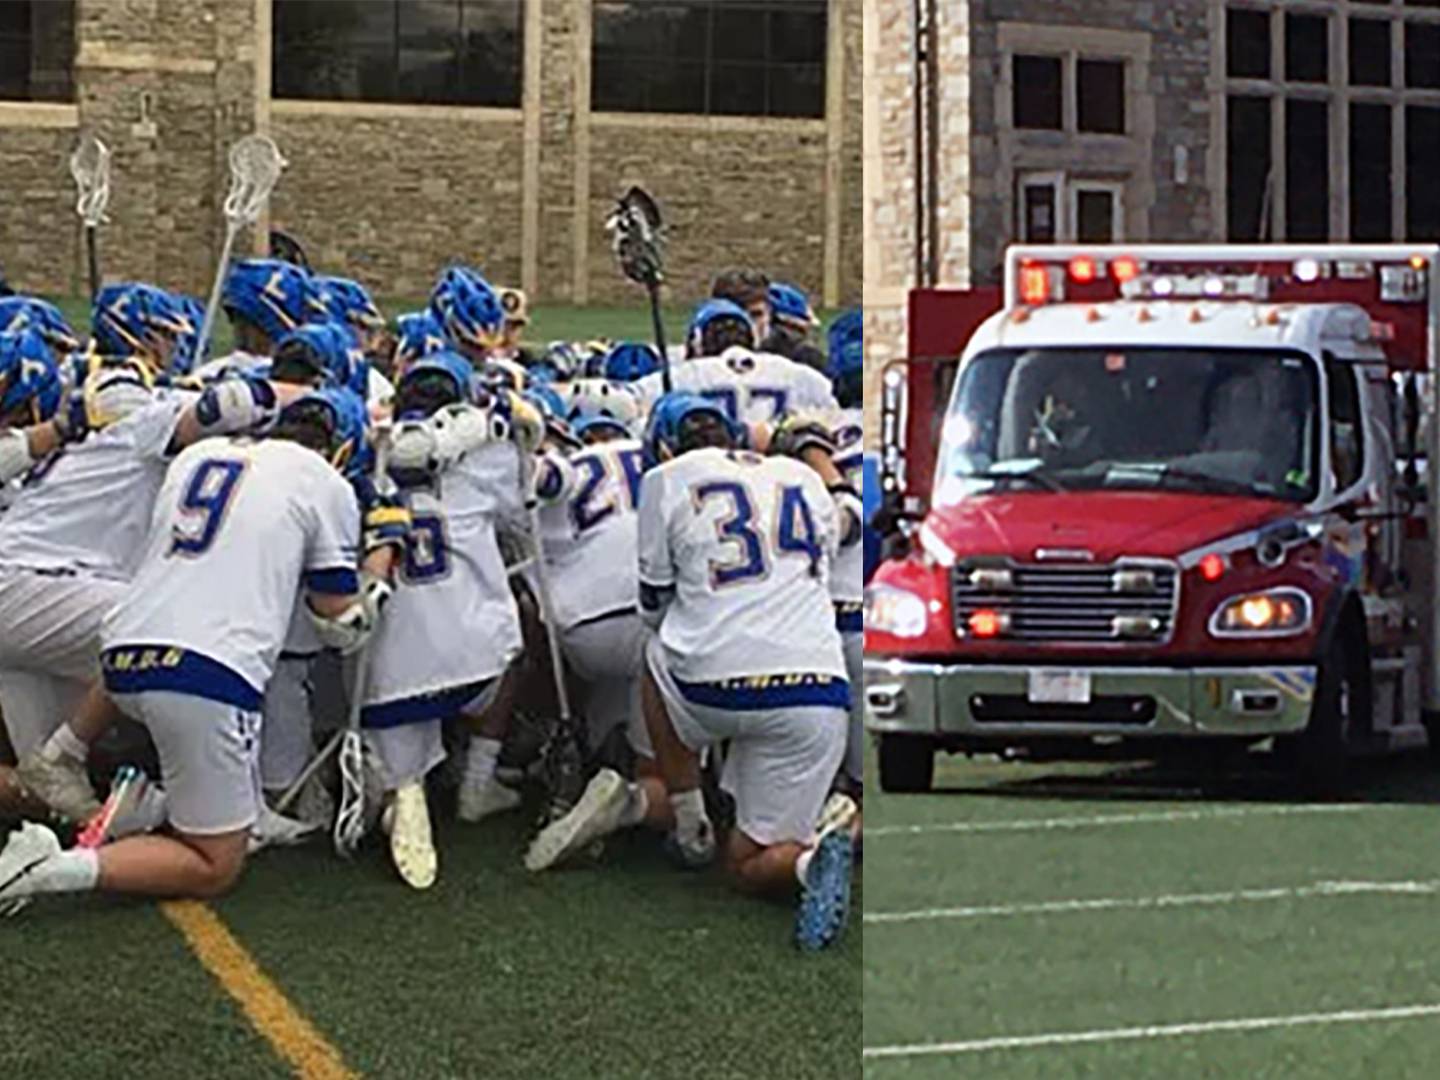 Scenes from Cincinnati's Paycor Stadium, Monday night, with players huddled in prayer and an ambulance on the field following the collapse of Buffalo Bills' safety Damar Hamlin during a game with the Cincinnati Bengals, bore a scary resemblance to April 16, 2021 at Loyola Blakefield. On that day, then Loyola freshman Peter Laake went into cardiac arrest after being struck in the chest by lacrosse ball. The heavyweight MIAA A Conference lacrosse game between the host Dons and McDonogh was suspended, just as Monday's NFL contest was. Laake, who recently committed to play his college lacrosse at the University of Maryland, eventually made a full recovery and is now playing lacrosse and football for the Dons.